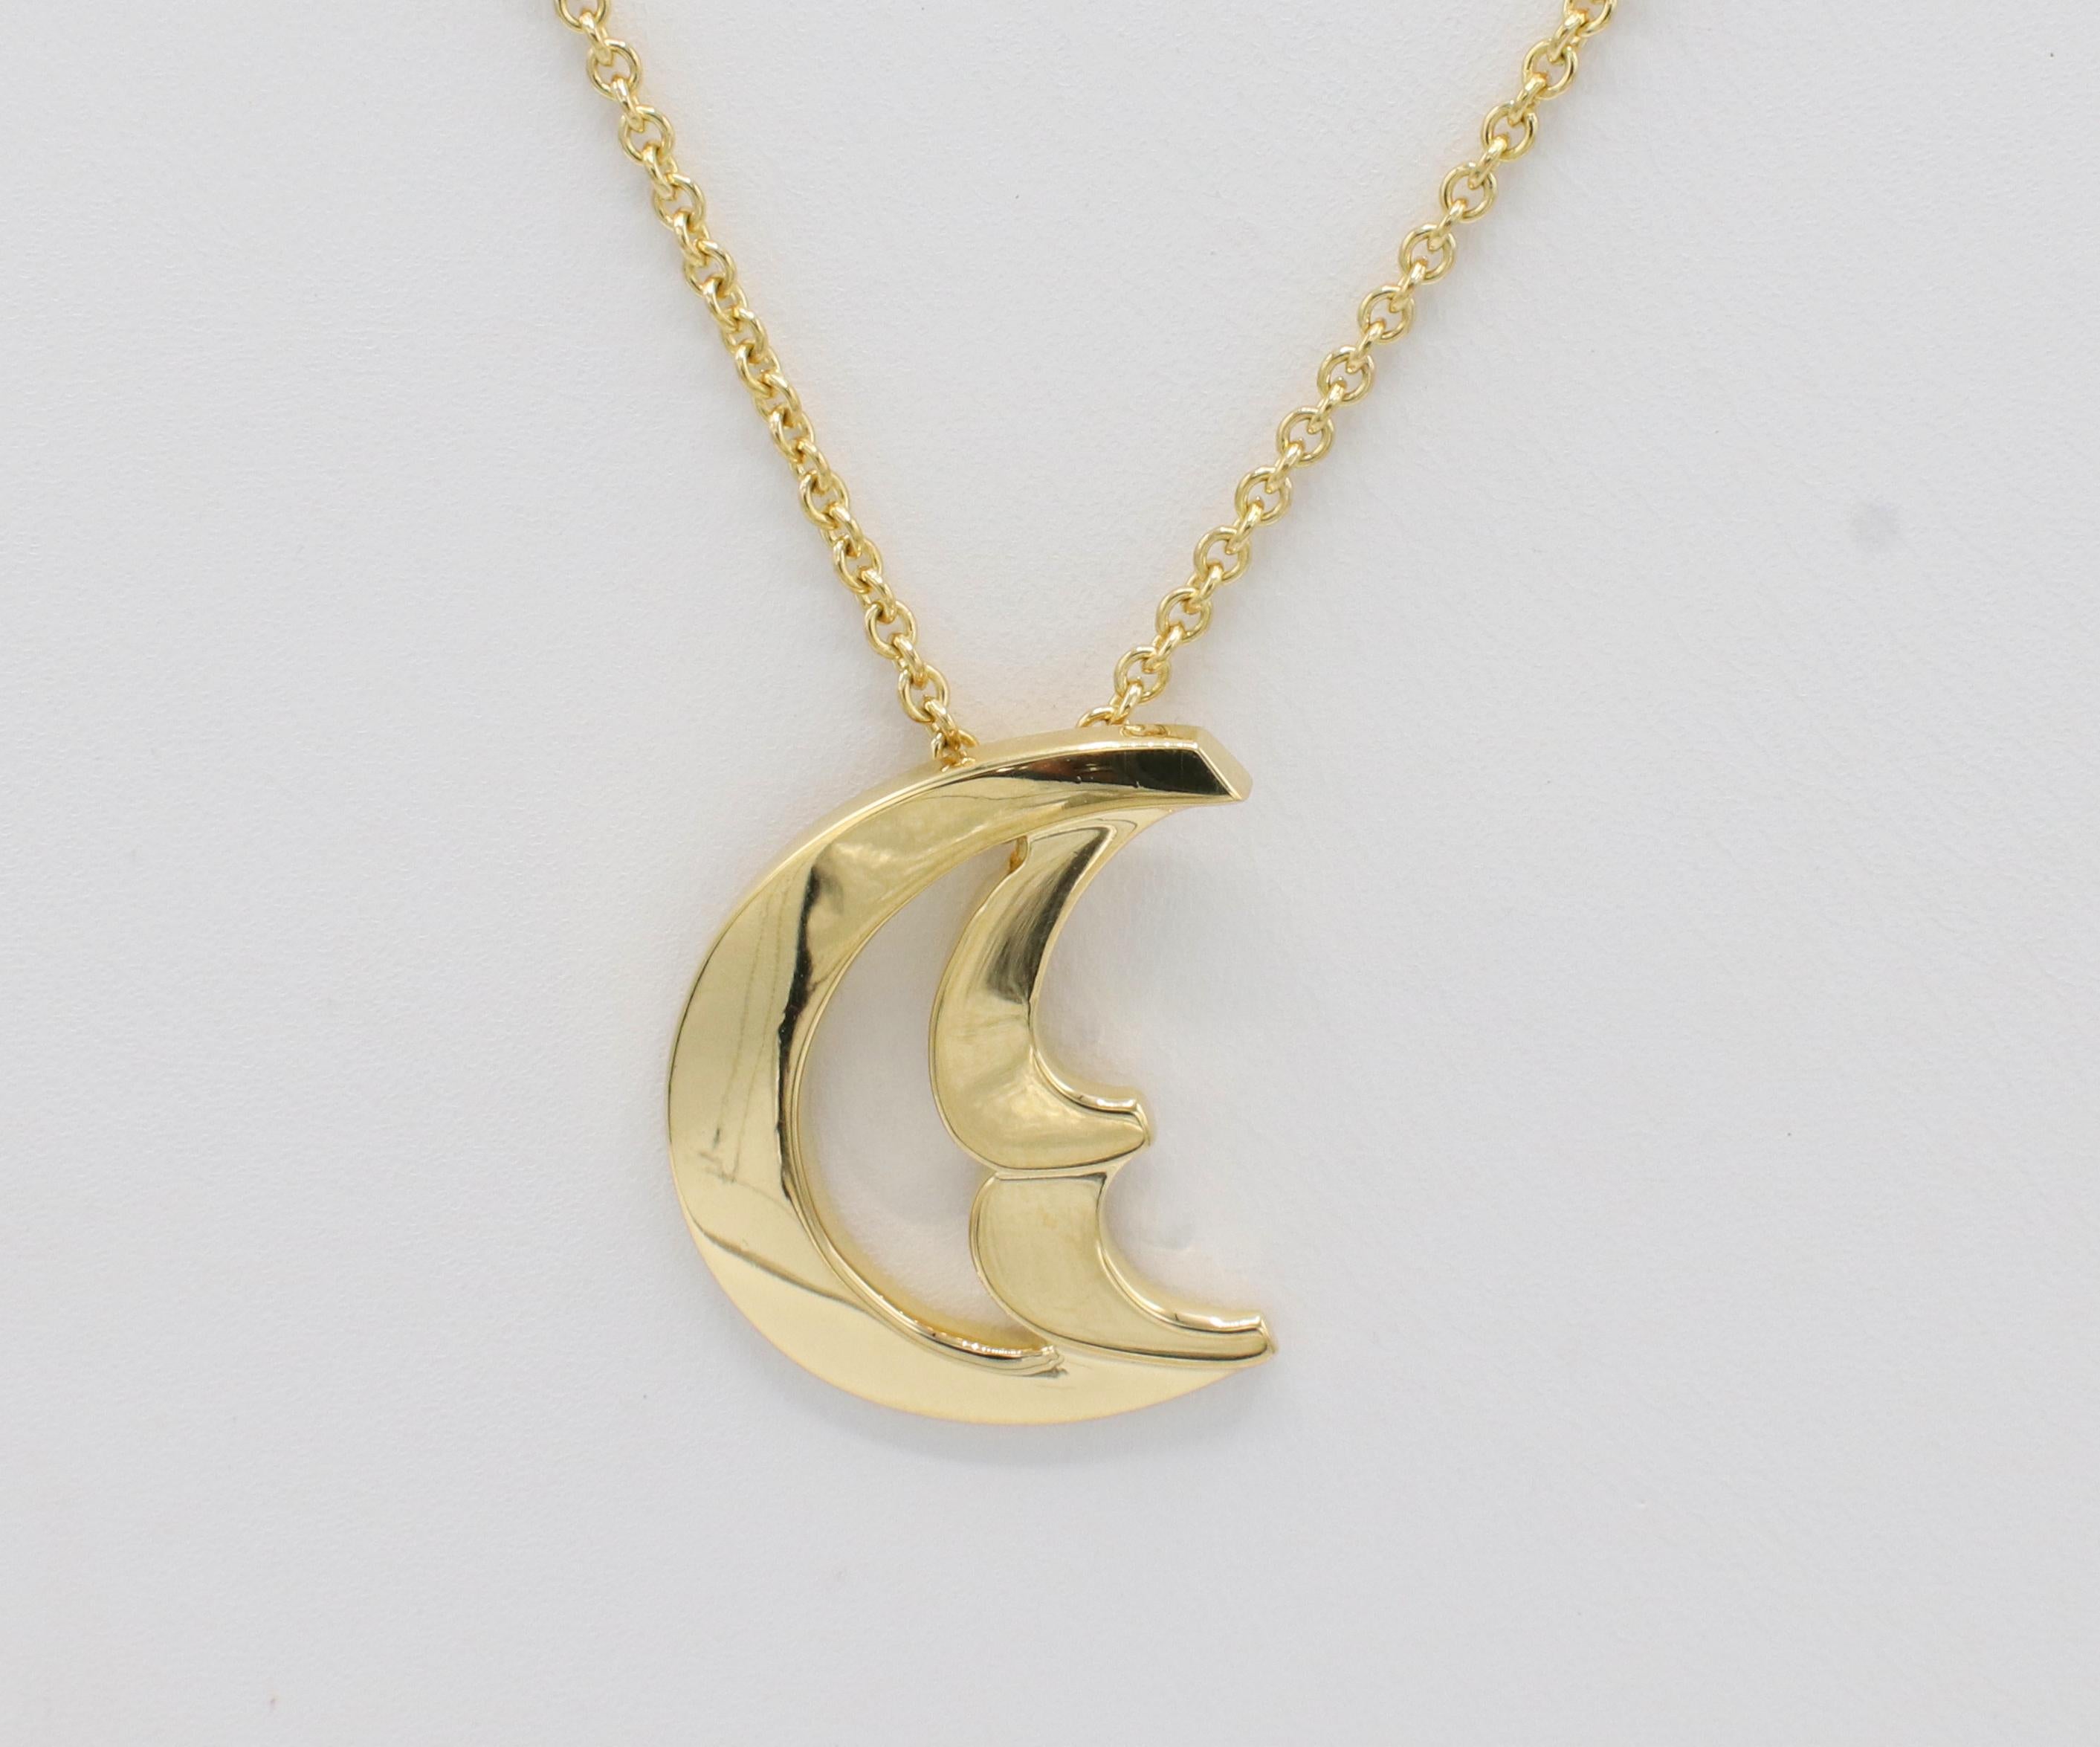 Tiffany & Co. Paloma Picasso 18 Karat Crescent Moon Pendant Drop Necklace 
Metal: 18k yellow gold
Weight: 8.6 grams
Pendant: 21 x 17.5mm
Chain length: 18 inches
Signed: Tiffany & Co. © Paloma Picasso 750